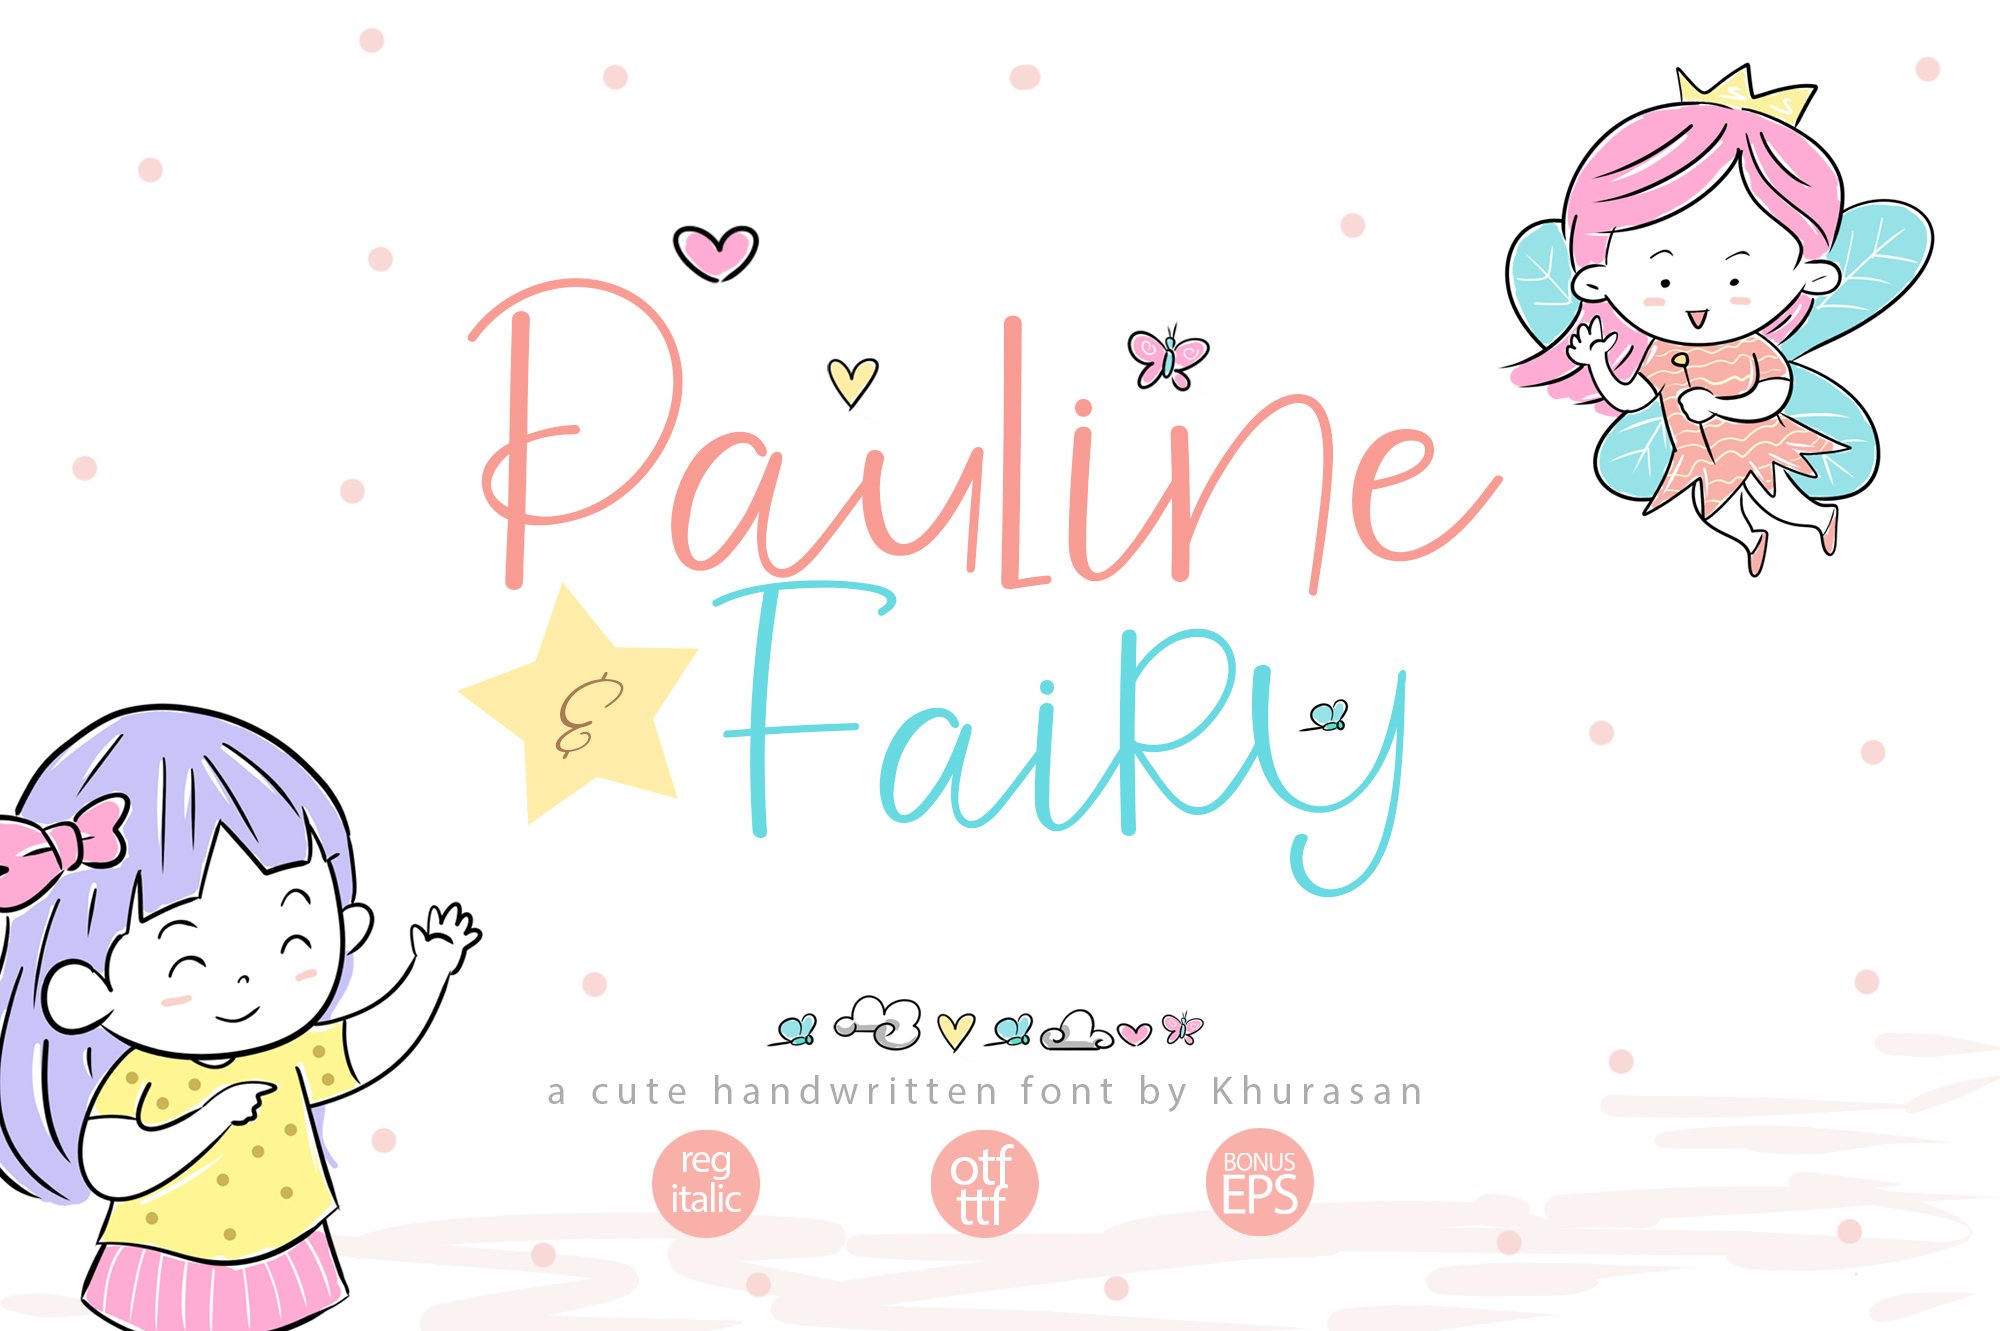 Pauline and Fairy Font cover image.